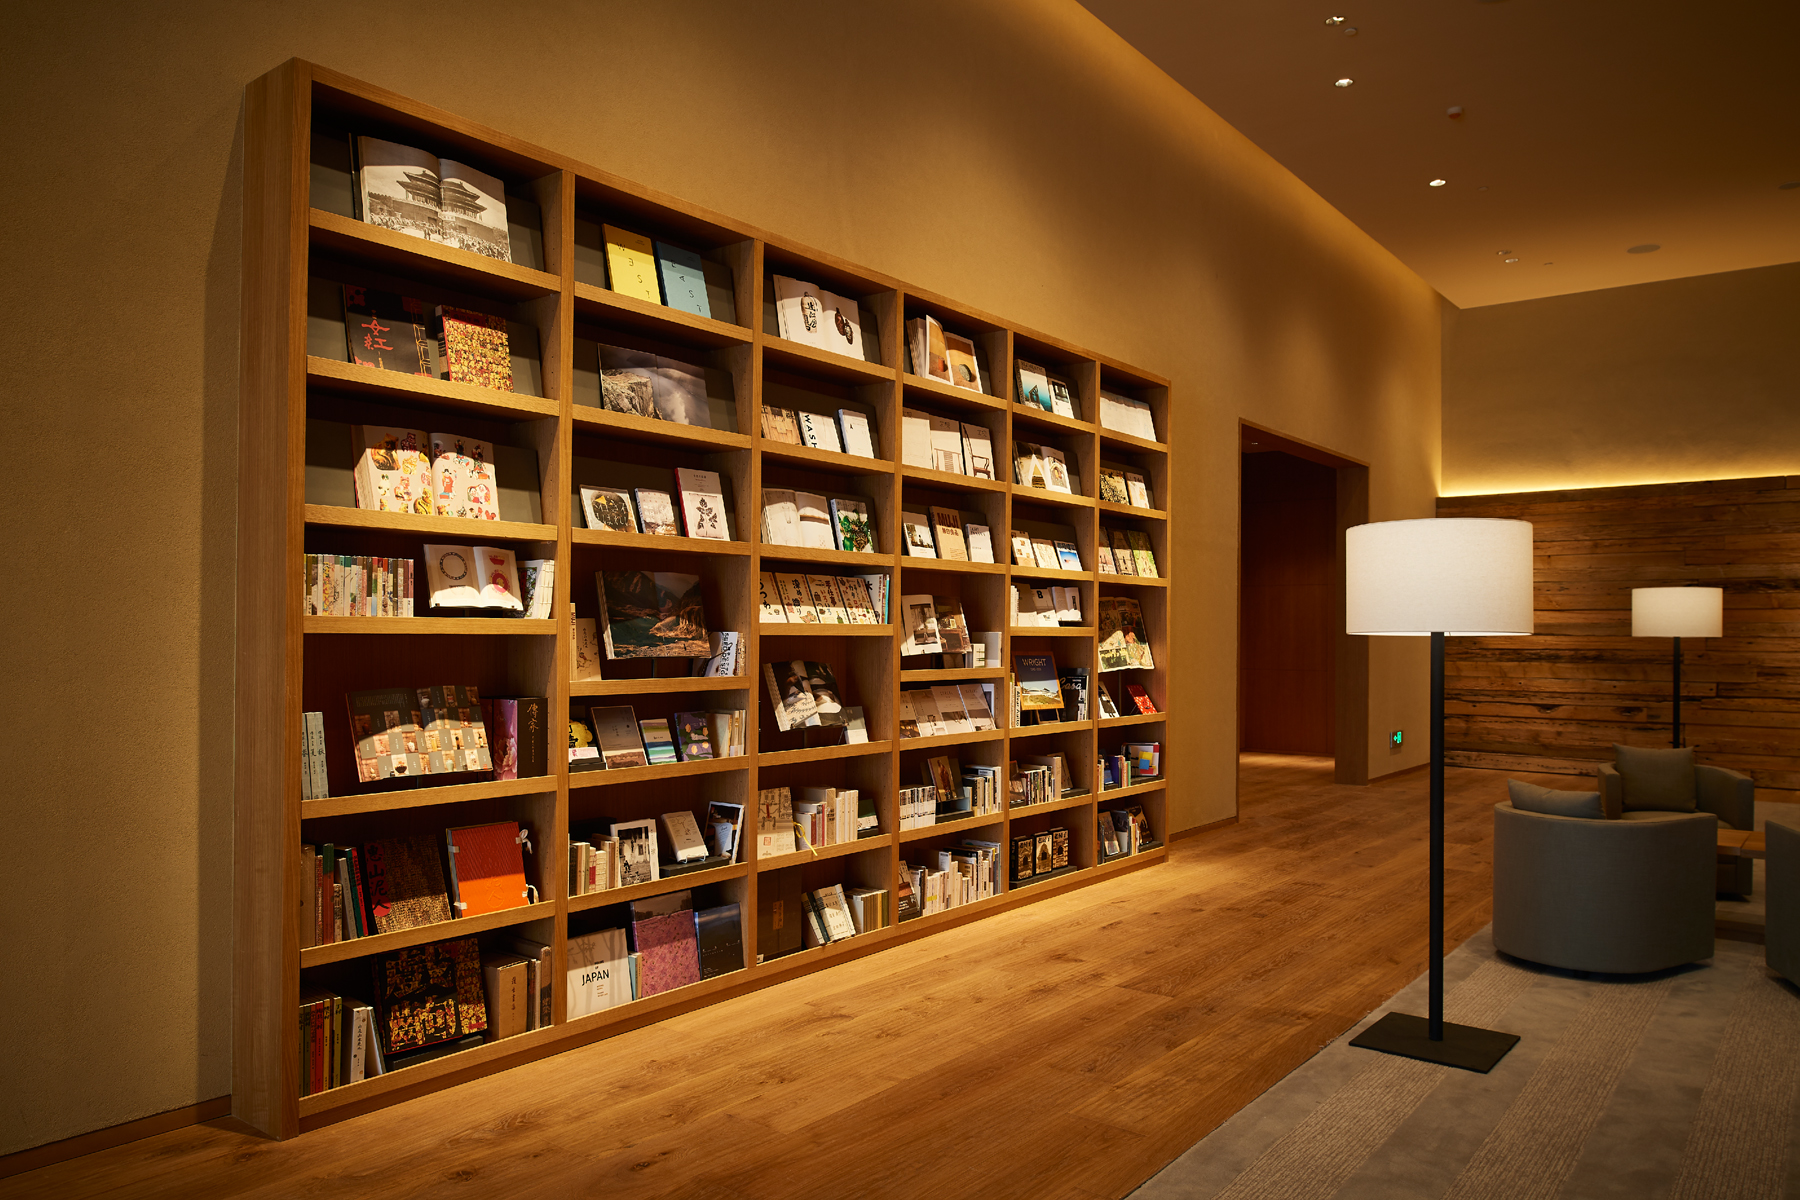 MUJI Hotel Shenzhen is a holistic haven from the world